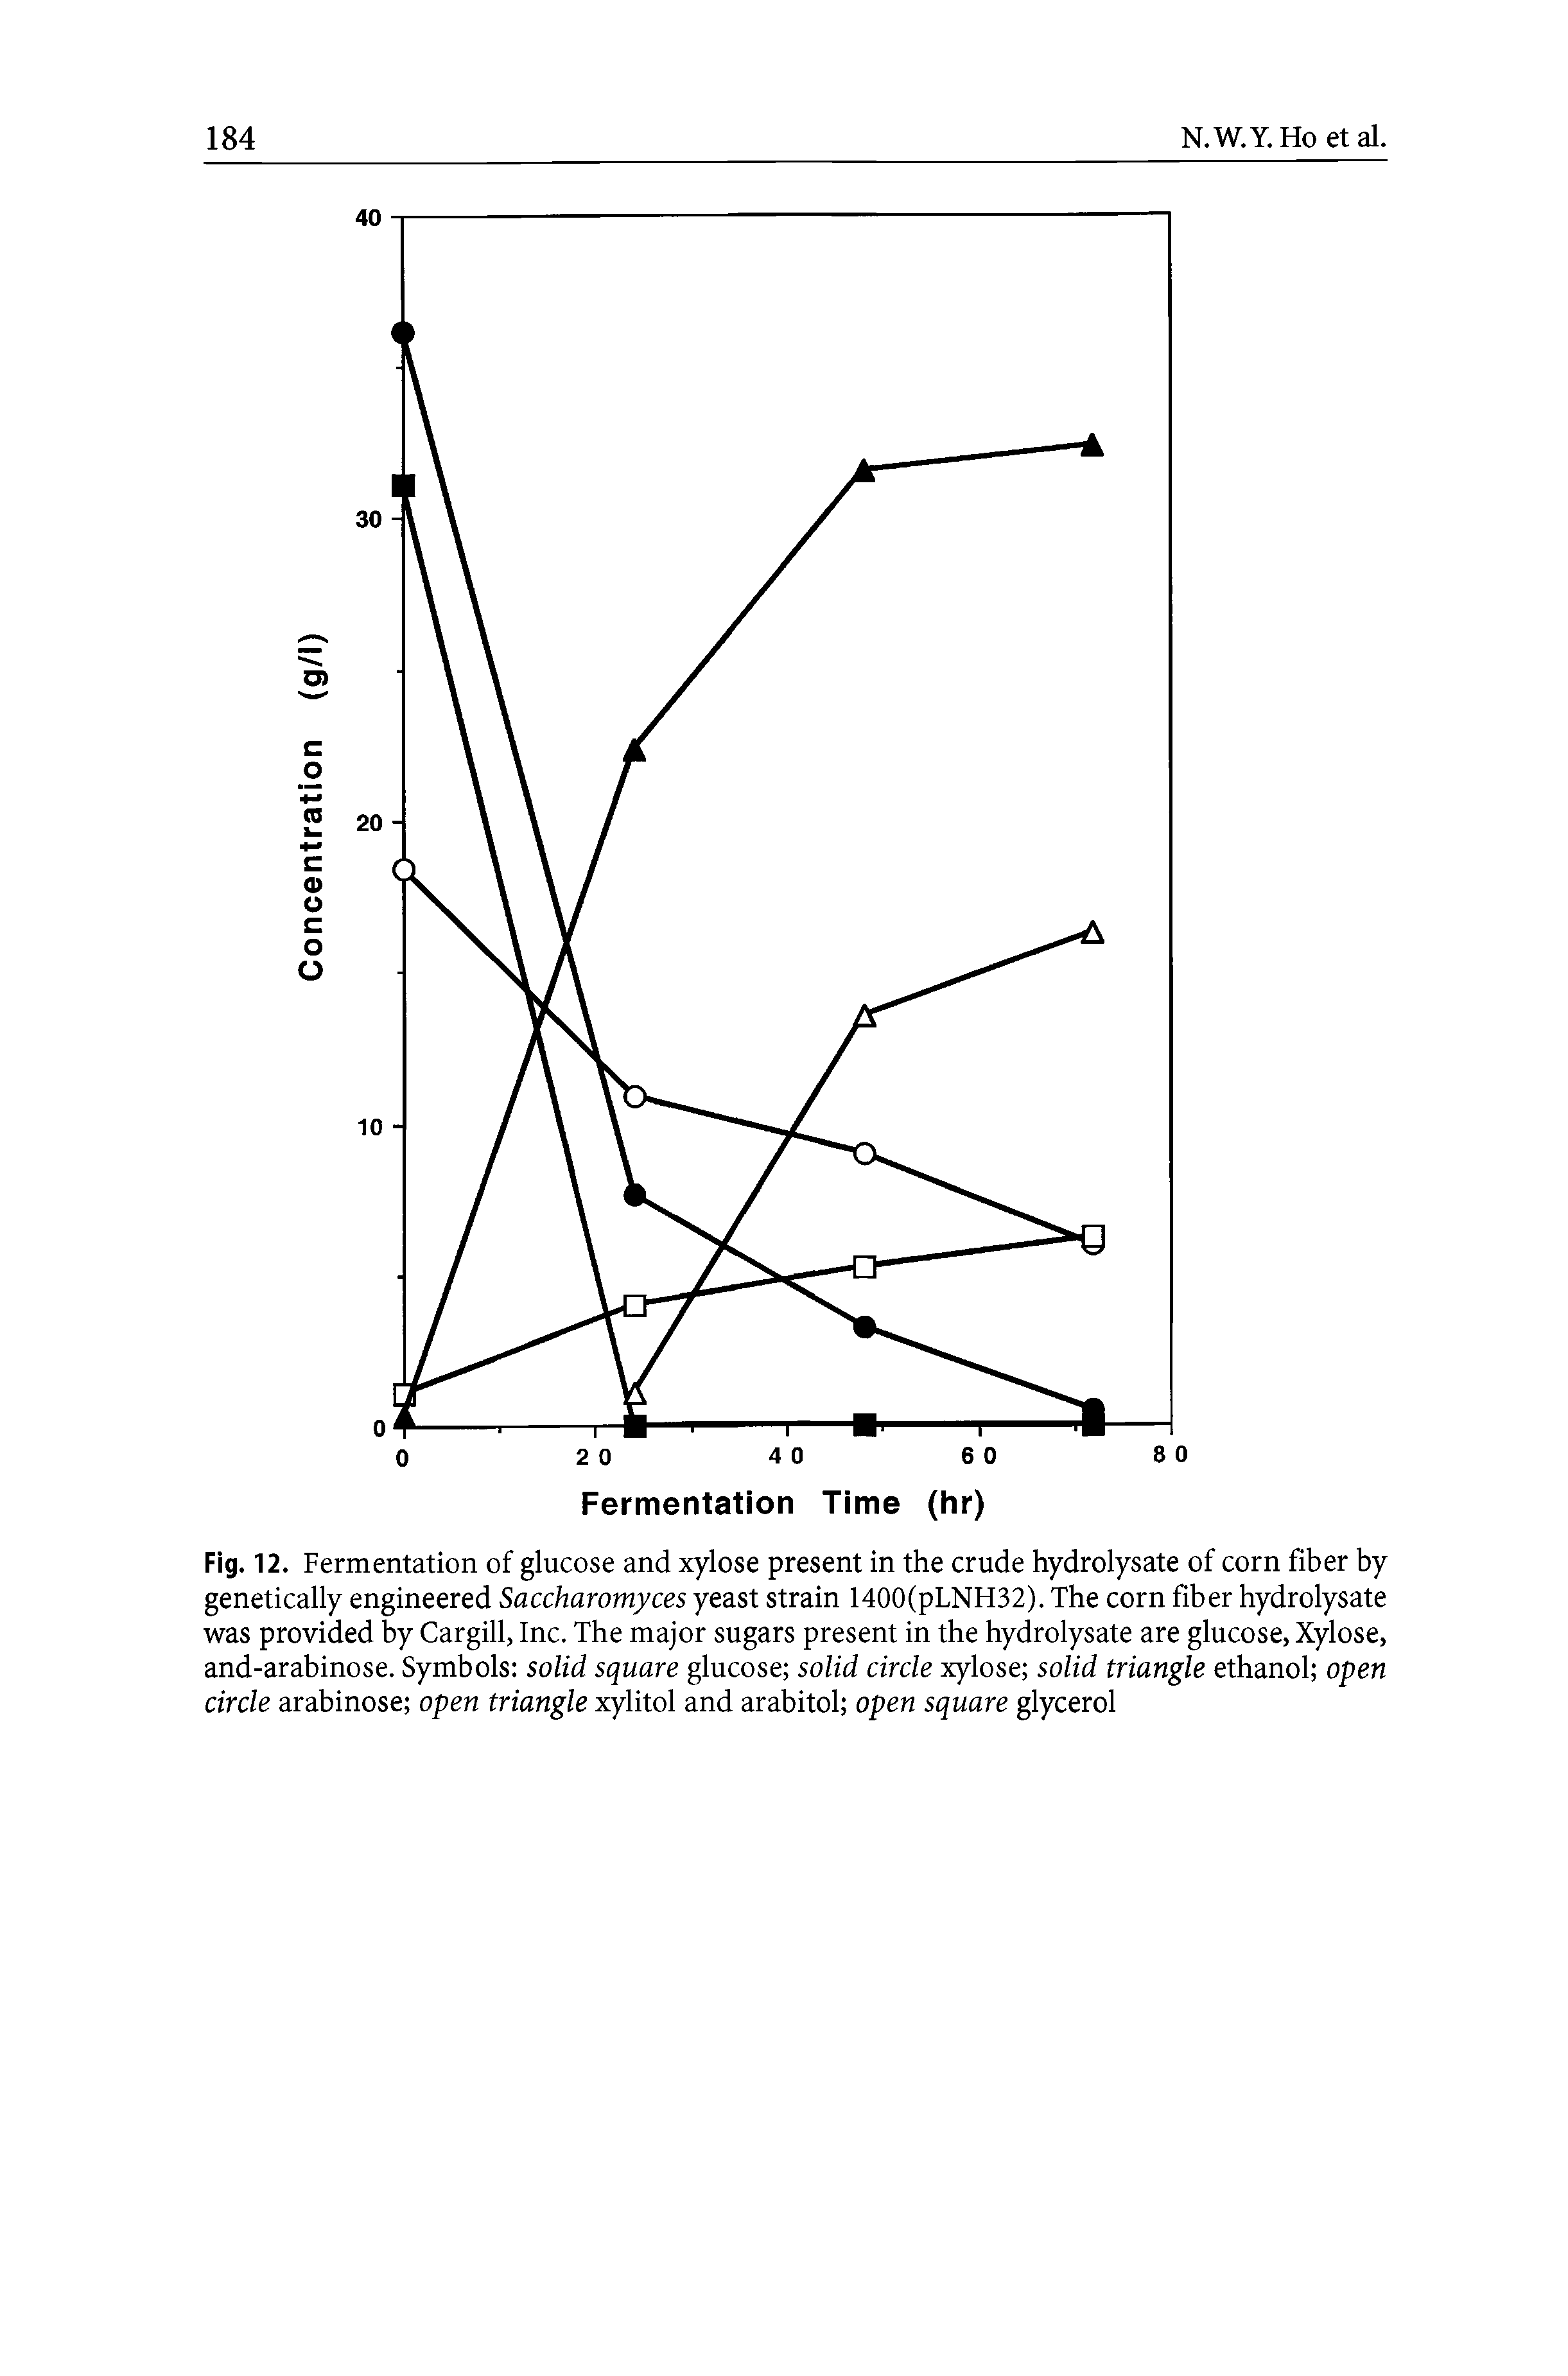 Fig. 12. Fermentation of glucose and xylose present in the crude hydrolysate of corn fiber by genetically engineered Saccharomyces yeast strain 1400(pLNH32). The corn fiber hydrolysate was provided by Cargill, Inc. The major sugars present in the hydrolysate are glucose, Xylose, and-arabinose. Symbols solid square glucose solid circle xylose solid triangle ethanol open circle arabinose open triangle xylitol and arabitol open square glycerol...